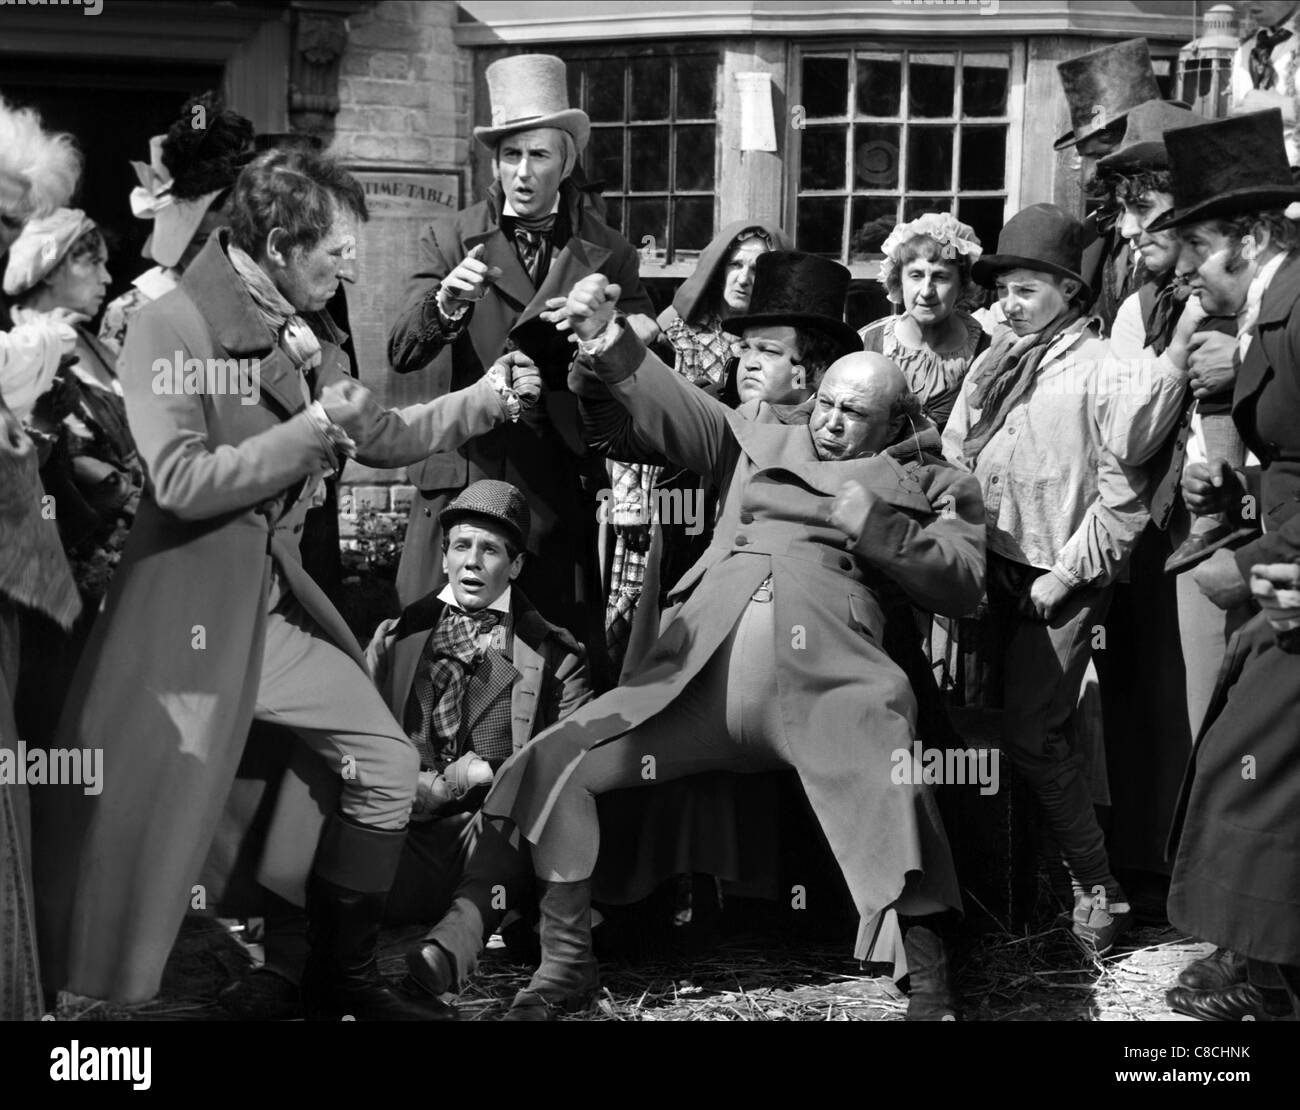 WILLIAM HARTNELL, JAMES HAYTER, LIONEL MURTON, LES PICKWICK Papers, 1952 Banque D'Images